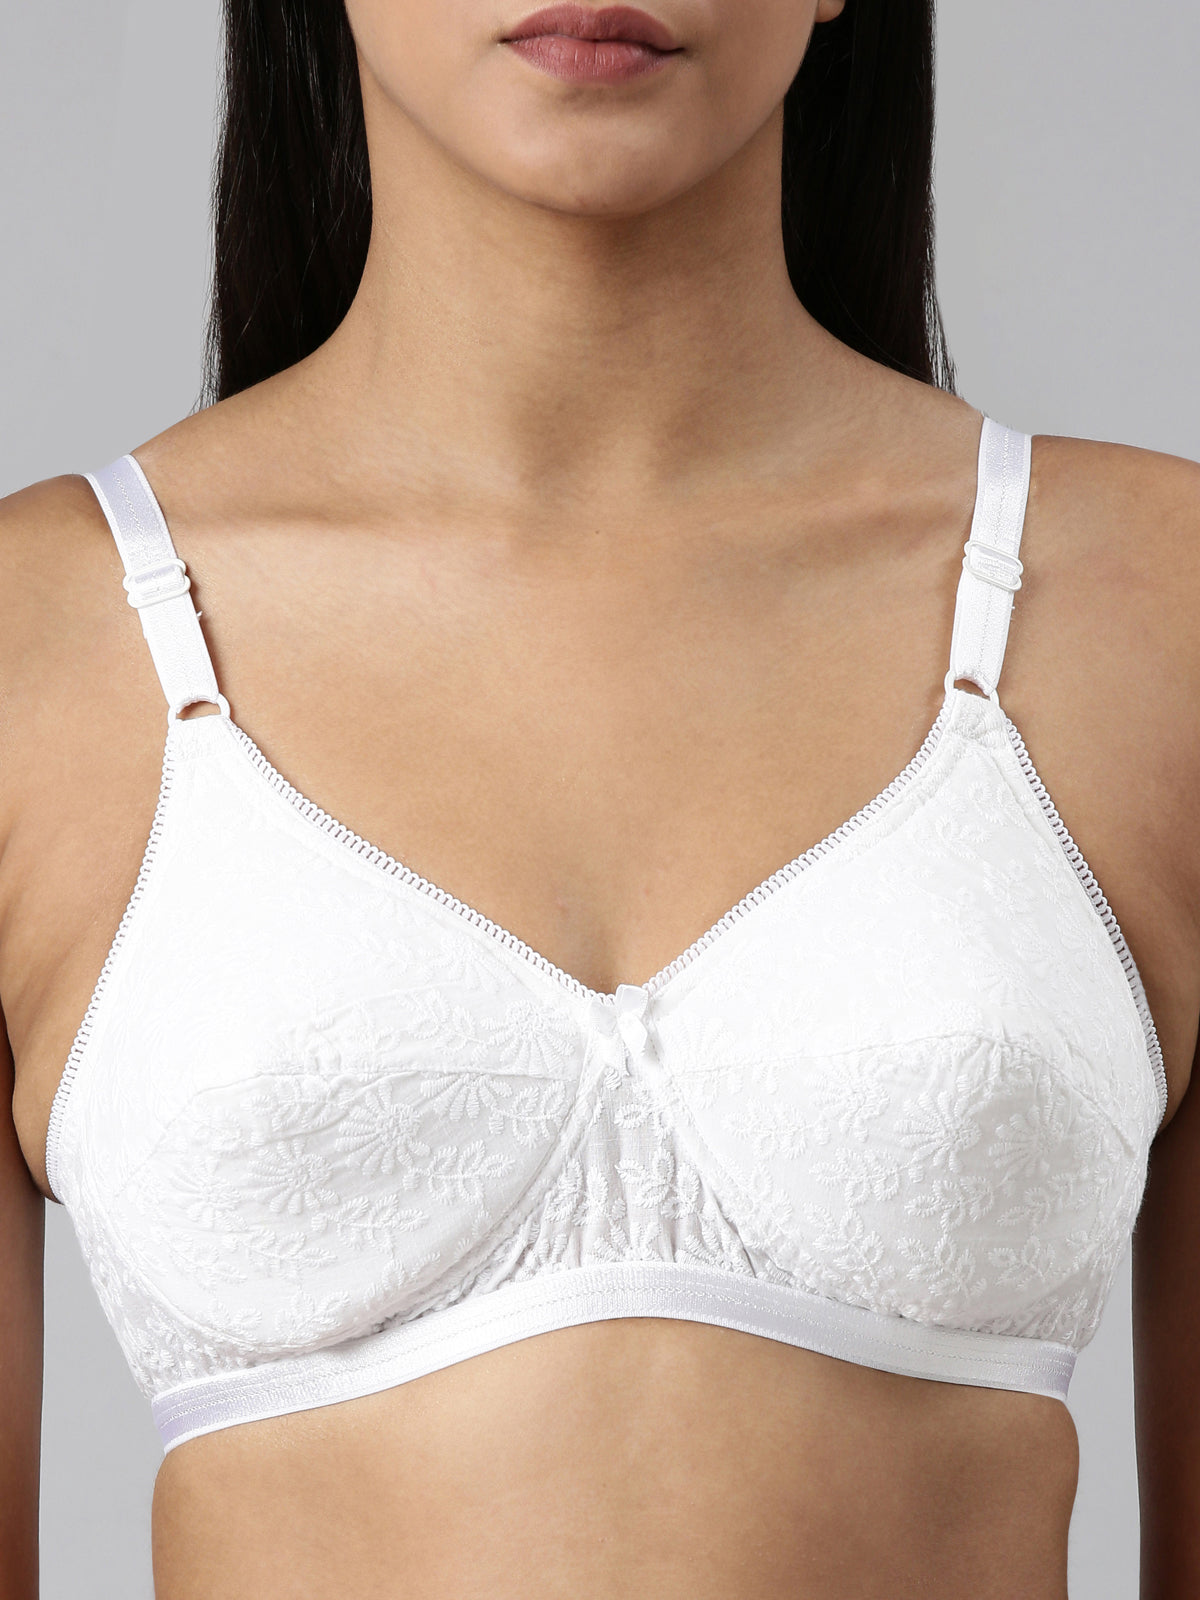 Bride collection Brigitte - Strapless bra with graduated cup